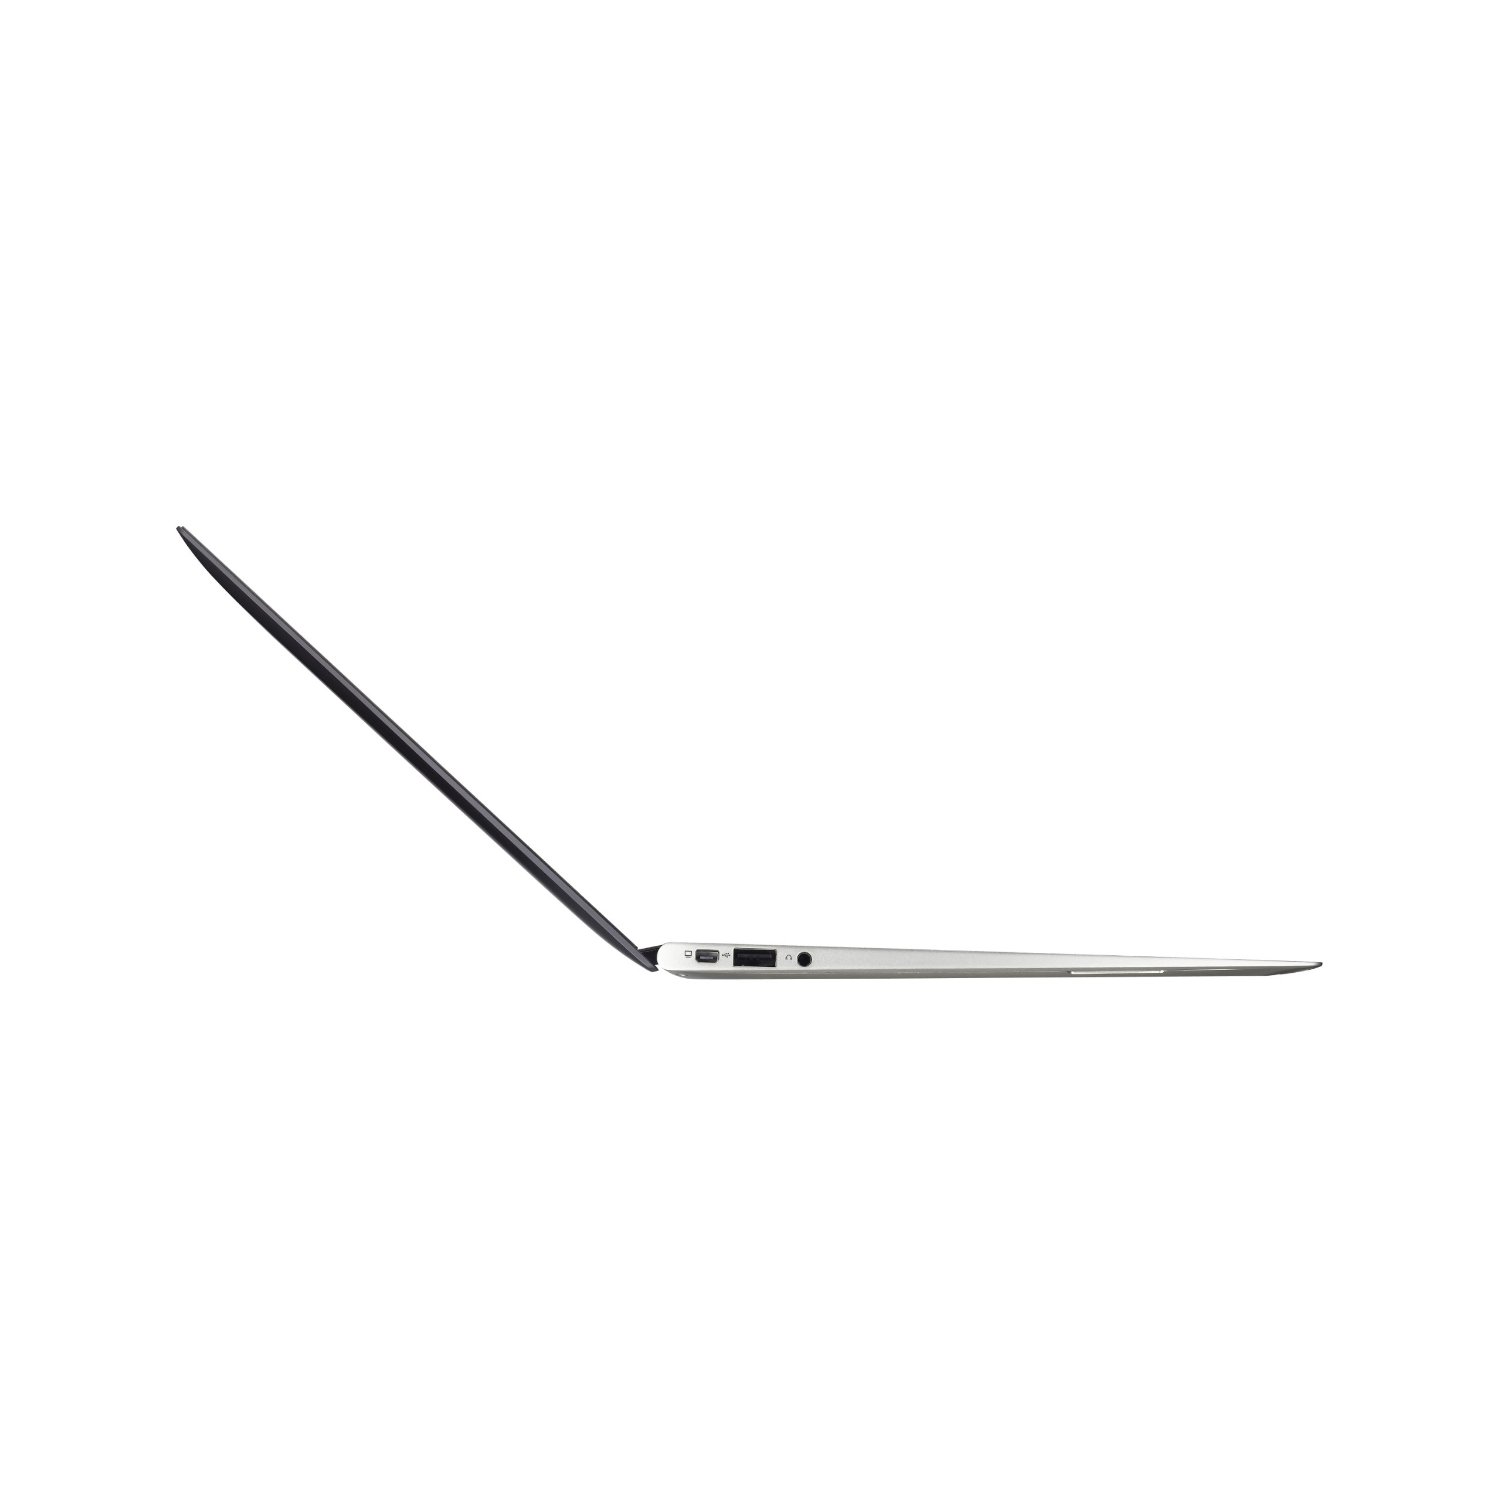 http://thetechjournal.com/wp-content/uploads/images/1112/1325329657-asus-zenbook-ux21edh71-116inch-thin-and-light-ultrabook-7.jpg